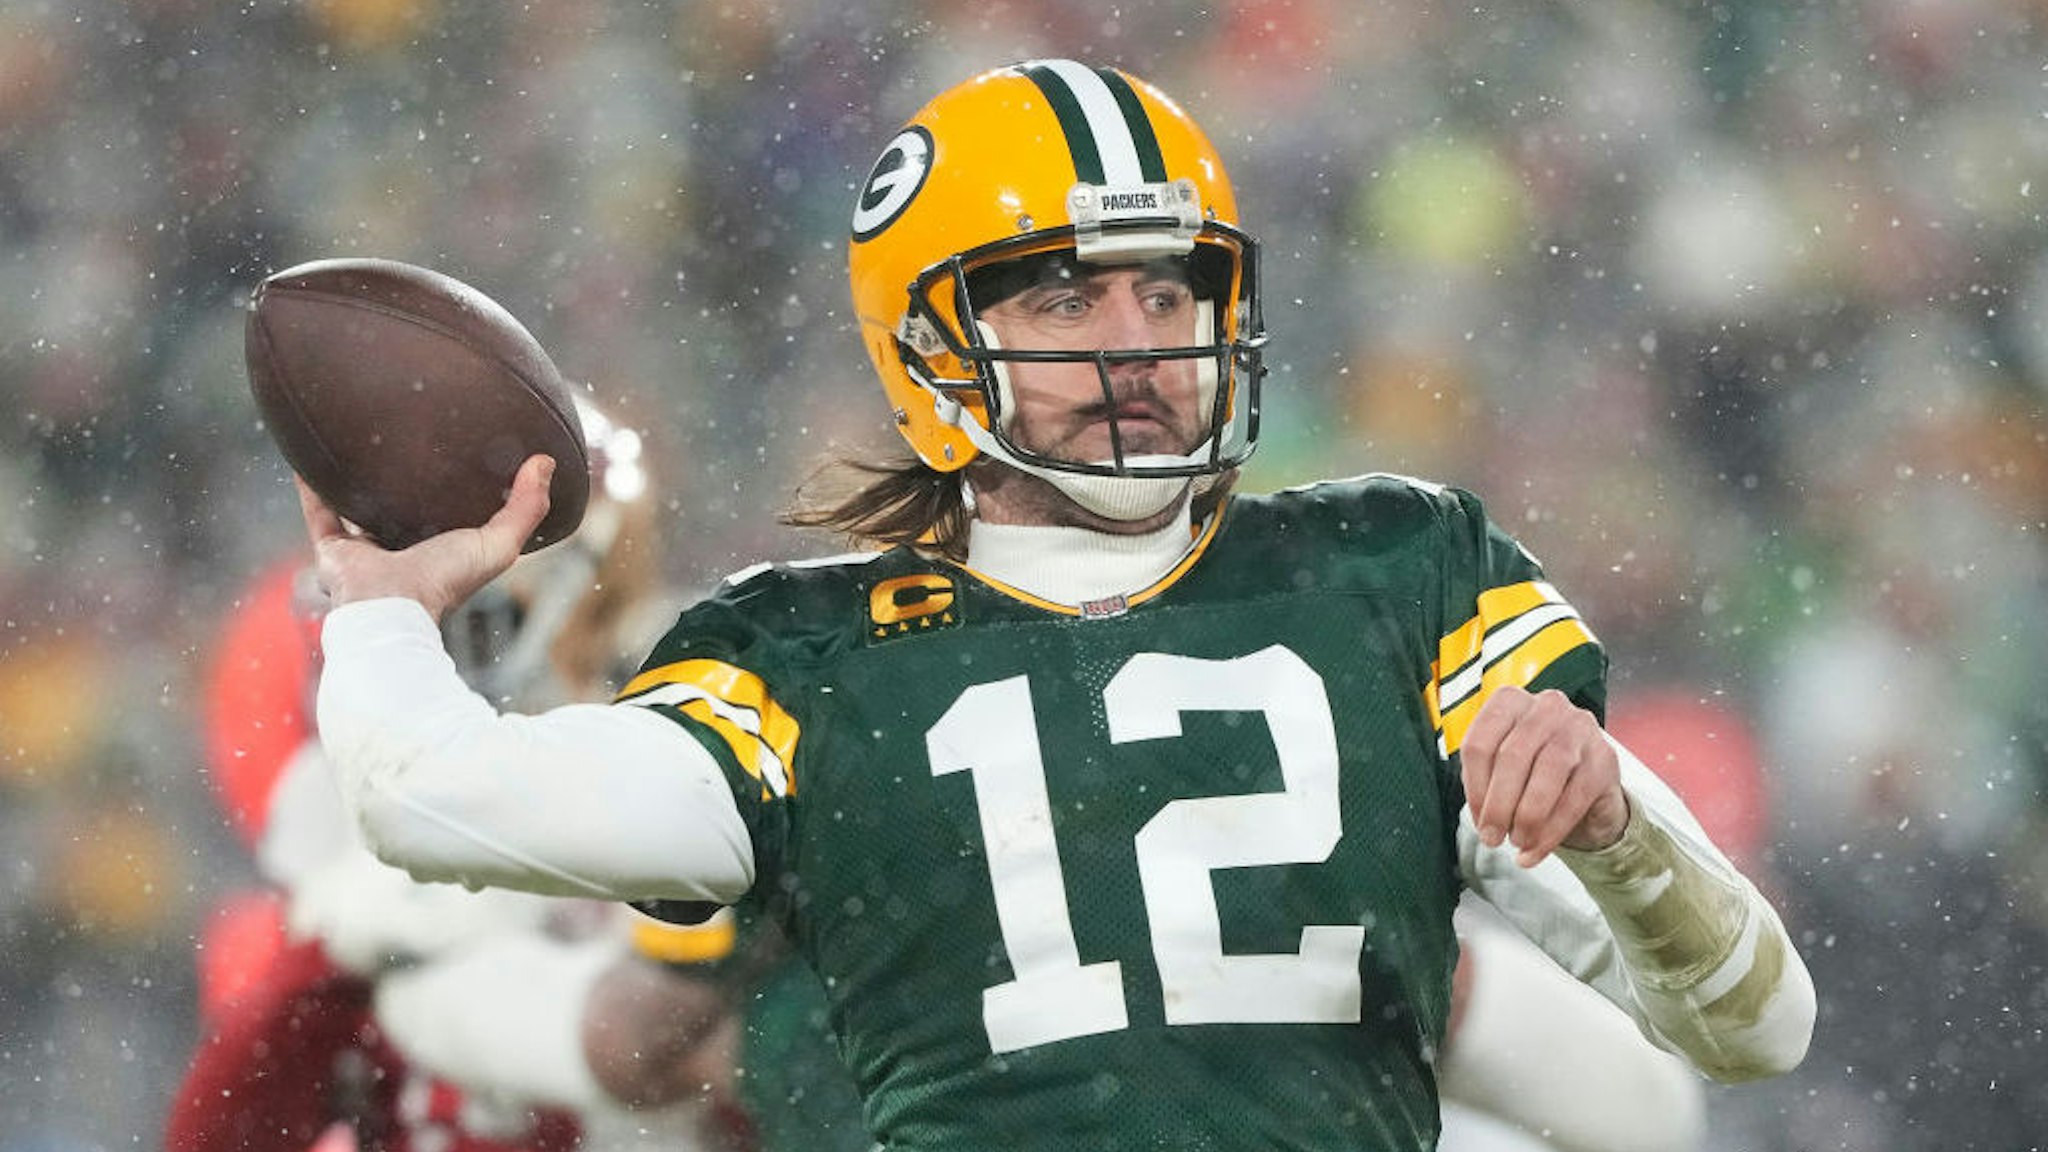 GREEN BAY, WISCONSIN - JANUARY 22: Quarterback Aaron Rodgers #12 of the Green Bay Packers passes2 during the 4th quarter of the NFC Divisional Playoff game against the San Francisco 49ers at Lambeau Field on January 22, 2022 in Green Bay, Wisconsin. (Photo by Patrick McDermott/Getty Images)